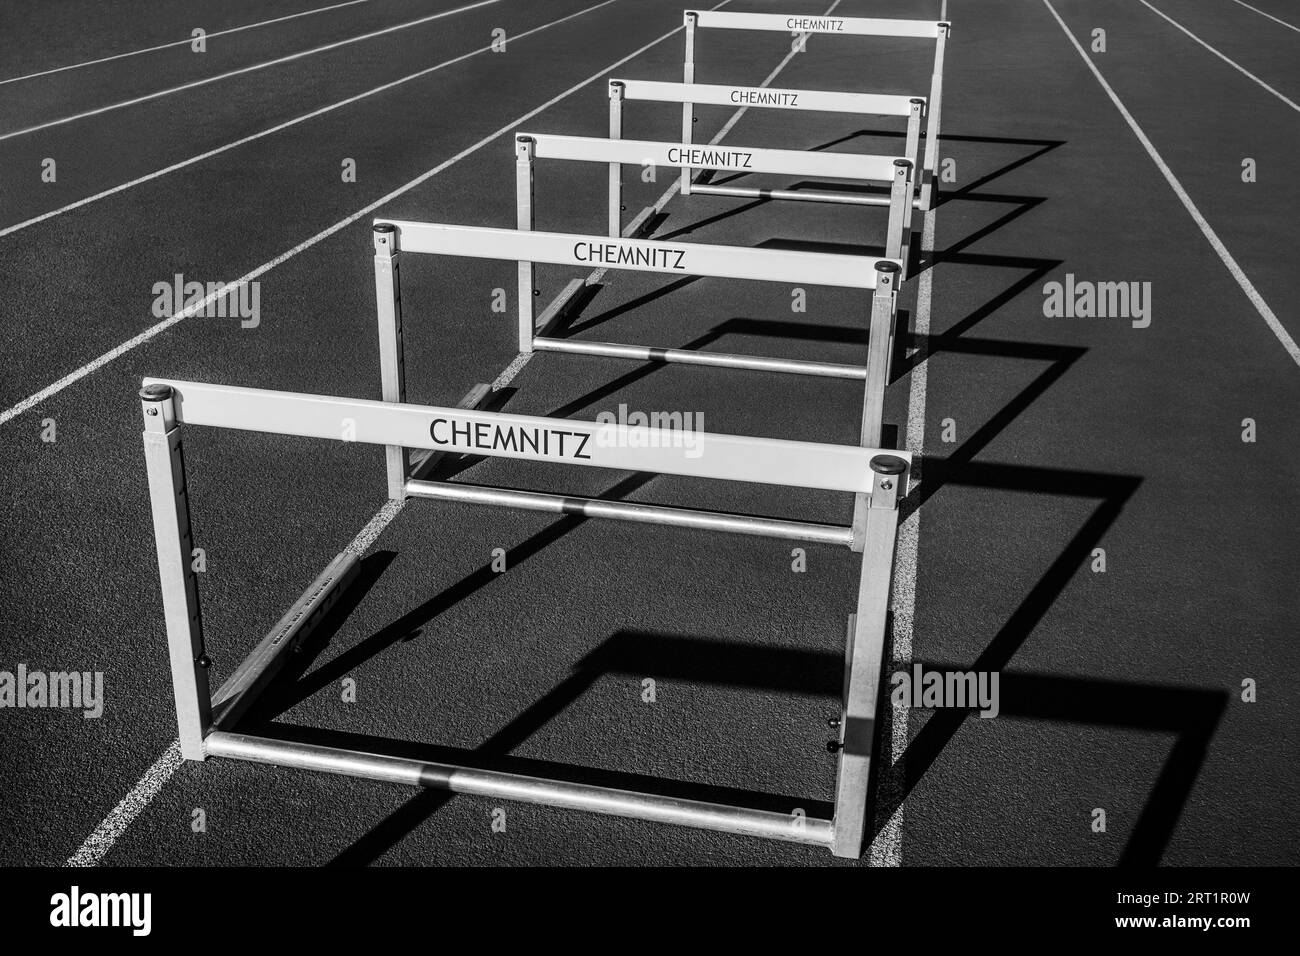 Sports facility in Chemnitz - hurdles on the running track Stock Photo